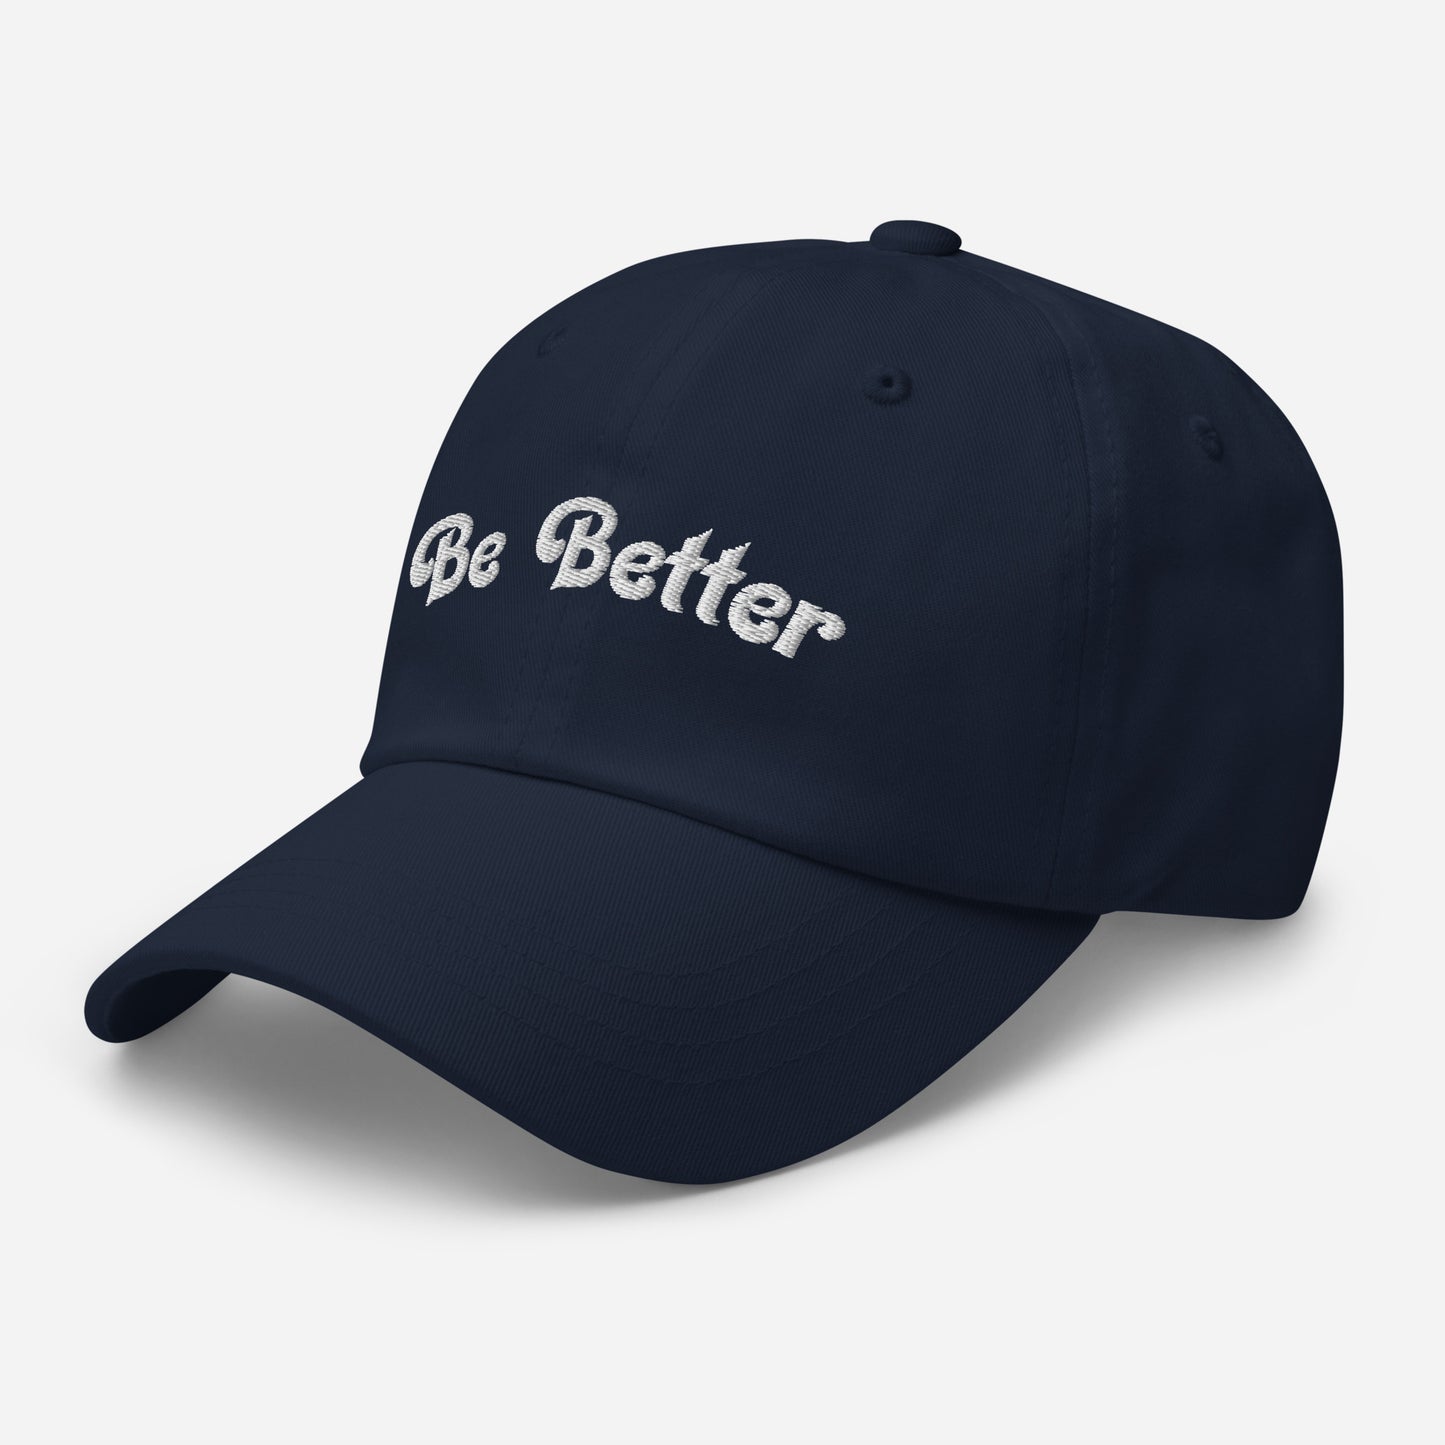 "Be Better" Dad hat